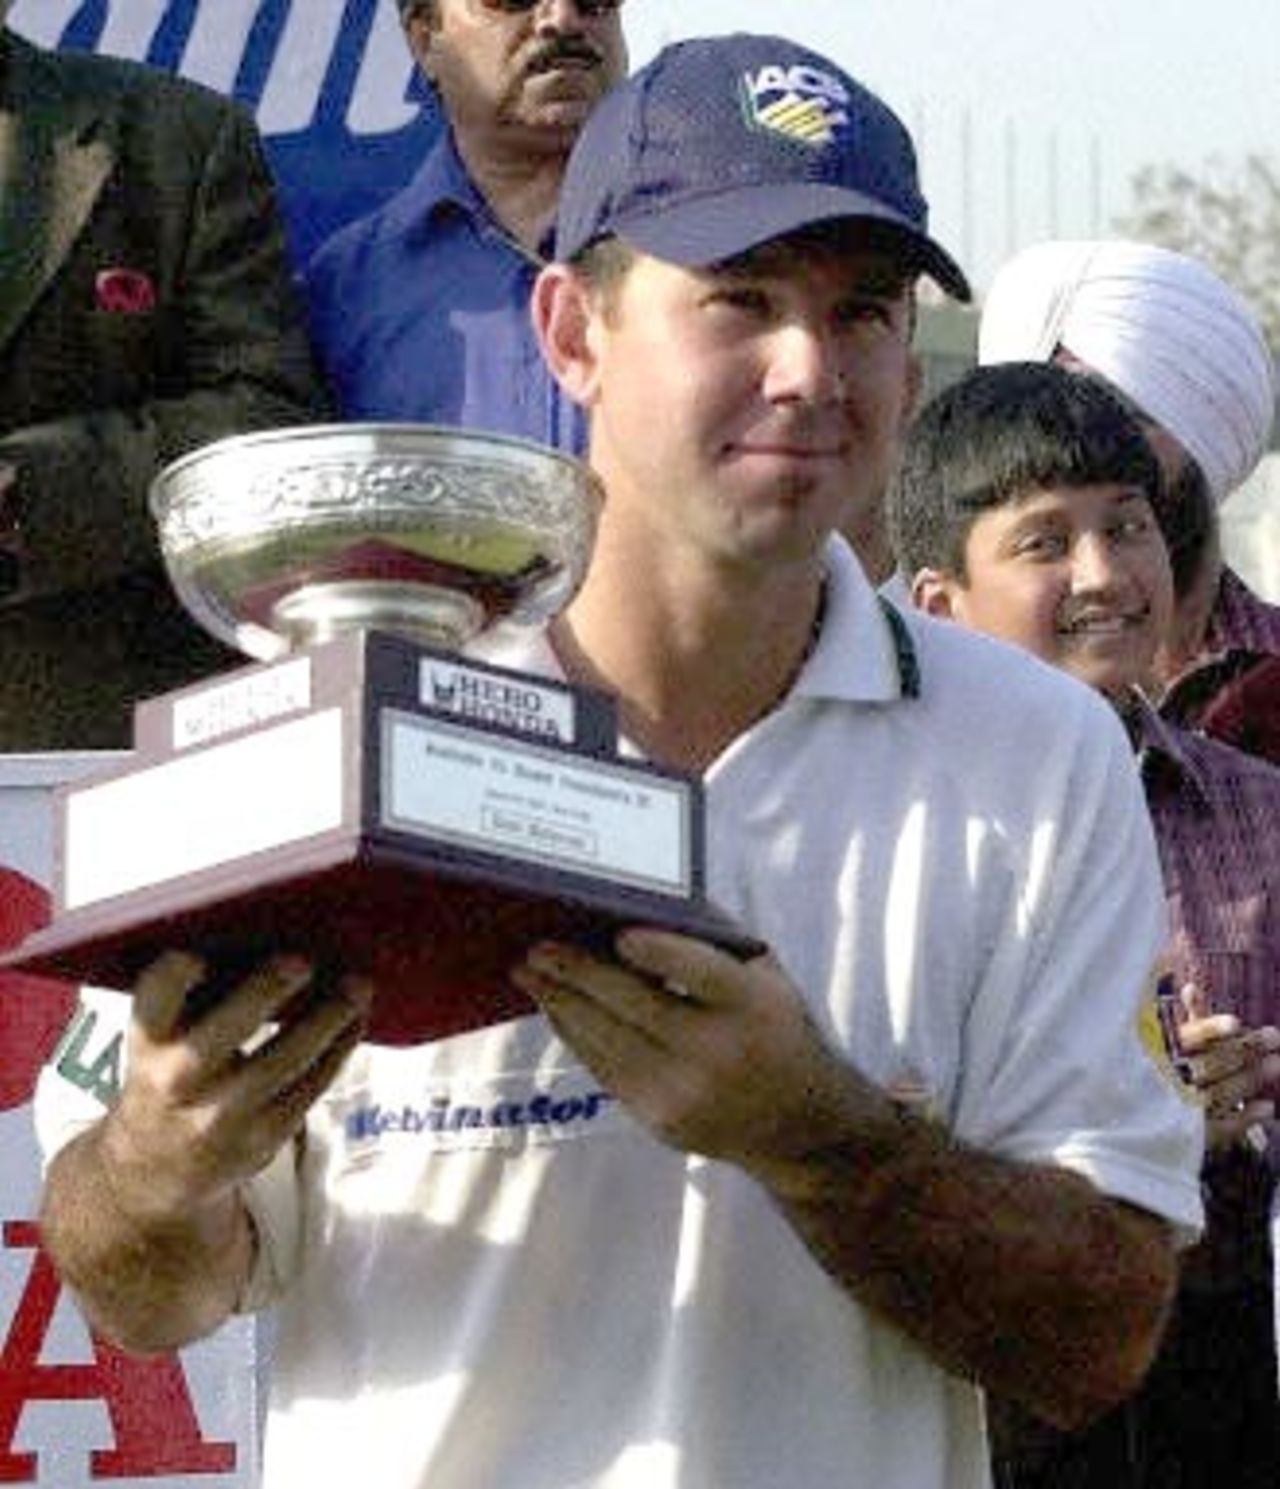 Australian batsman Ricky Ponting hold his best batsman trophy in New Delhi's Ferozshah Kotla ground 08 March 2001. Ponting scored 102 not out in their second innings against Board President's XI at the final day of the three-day match which ended in draw.